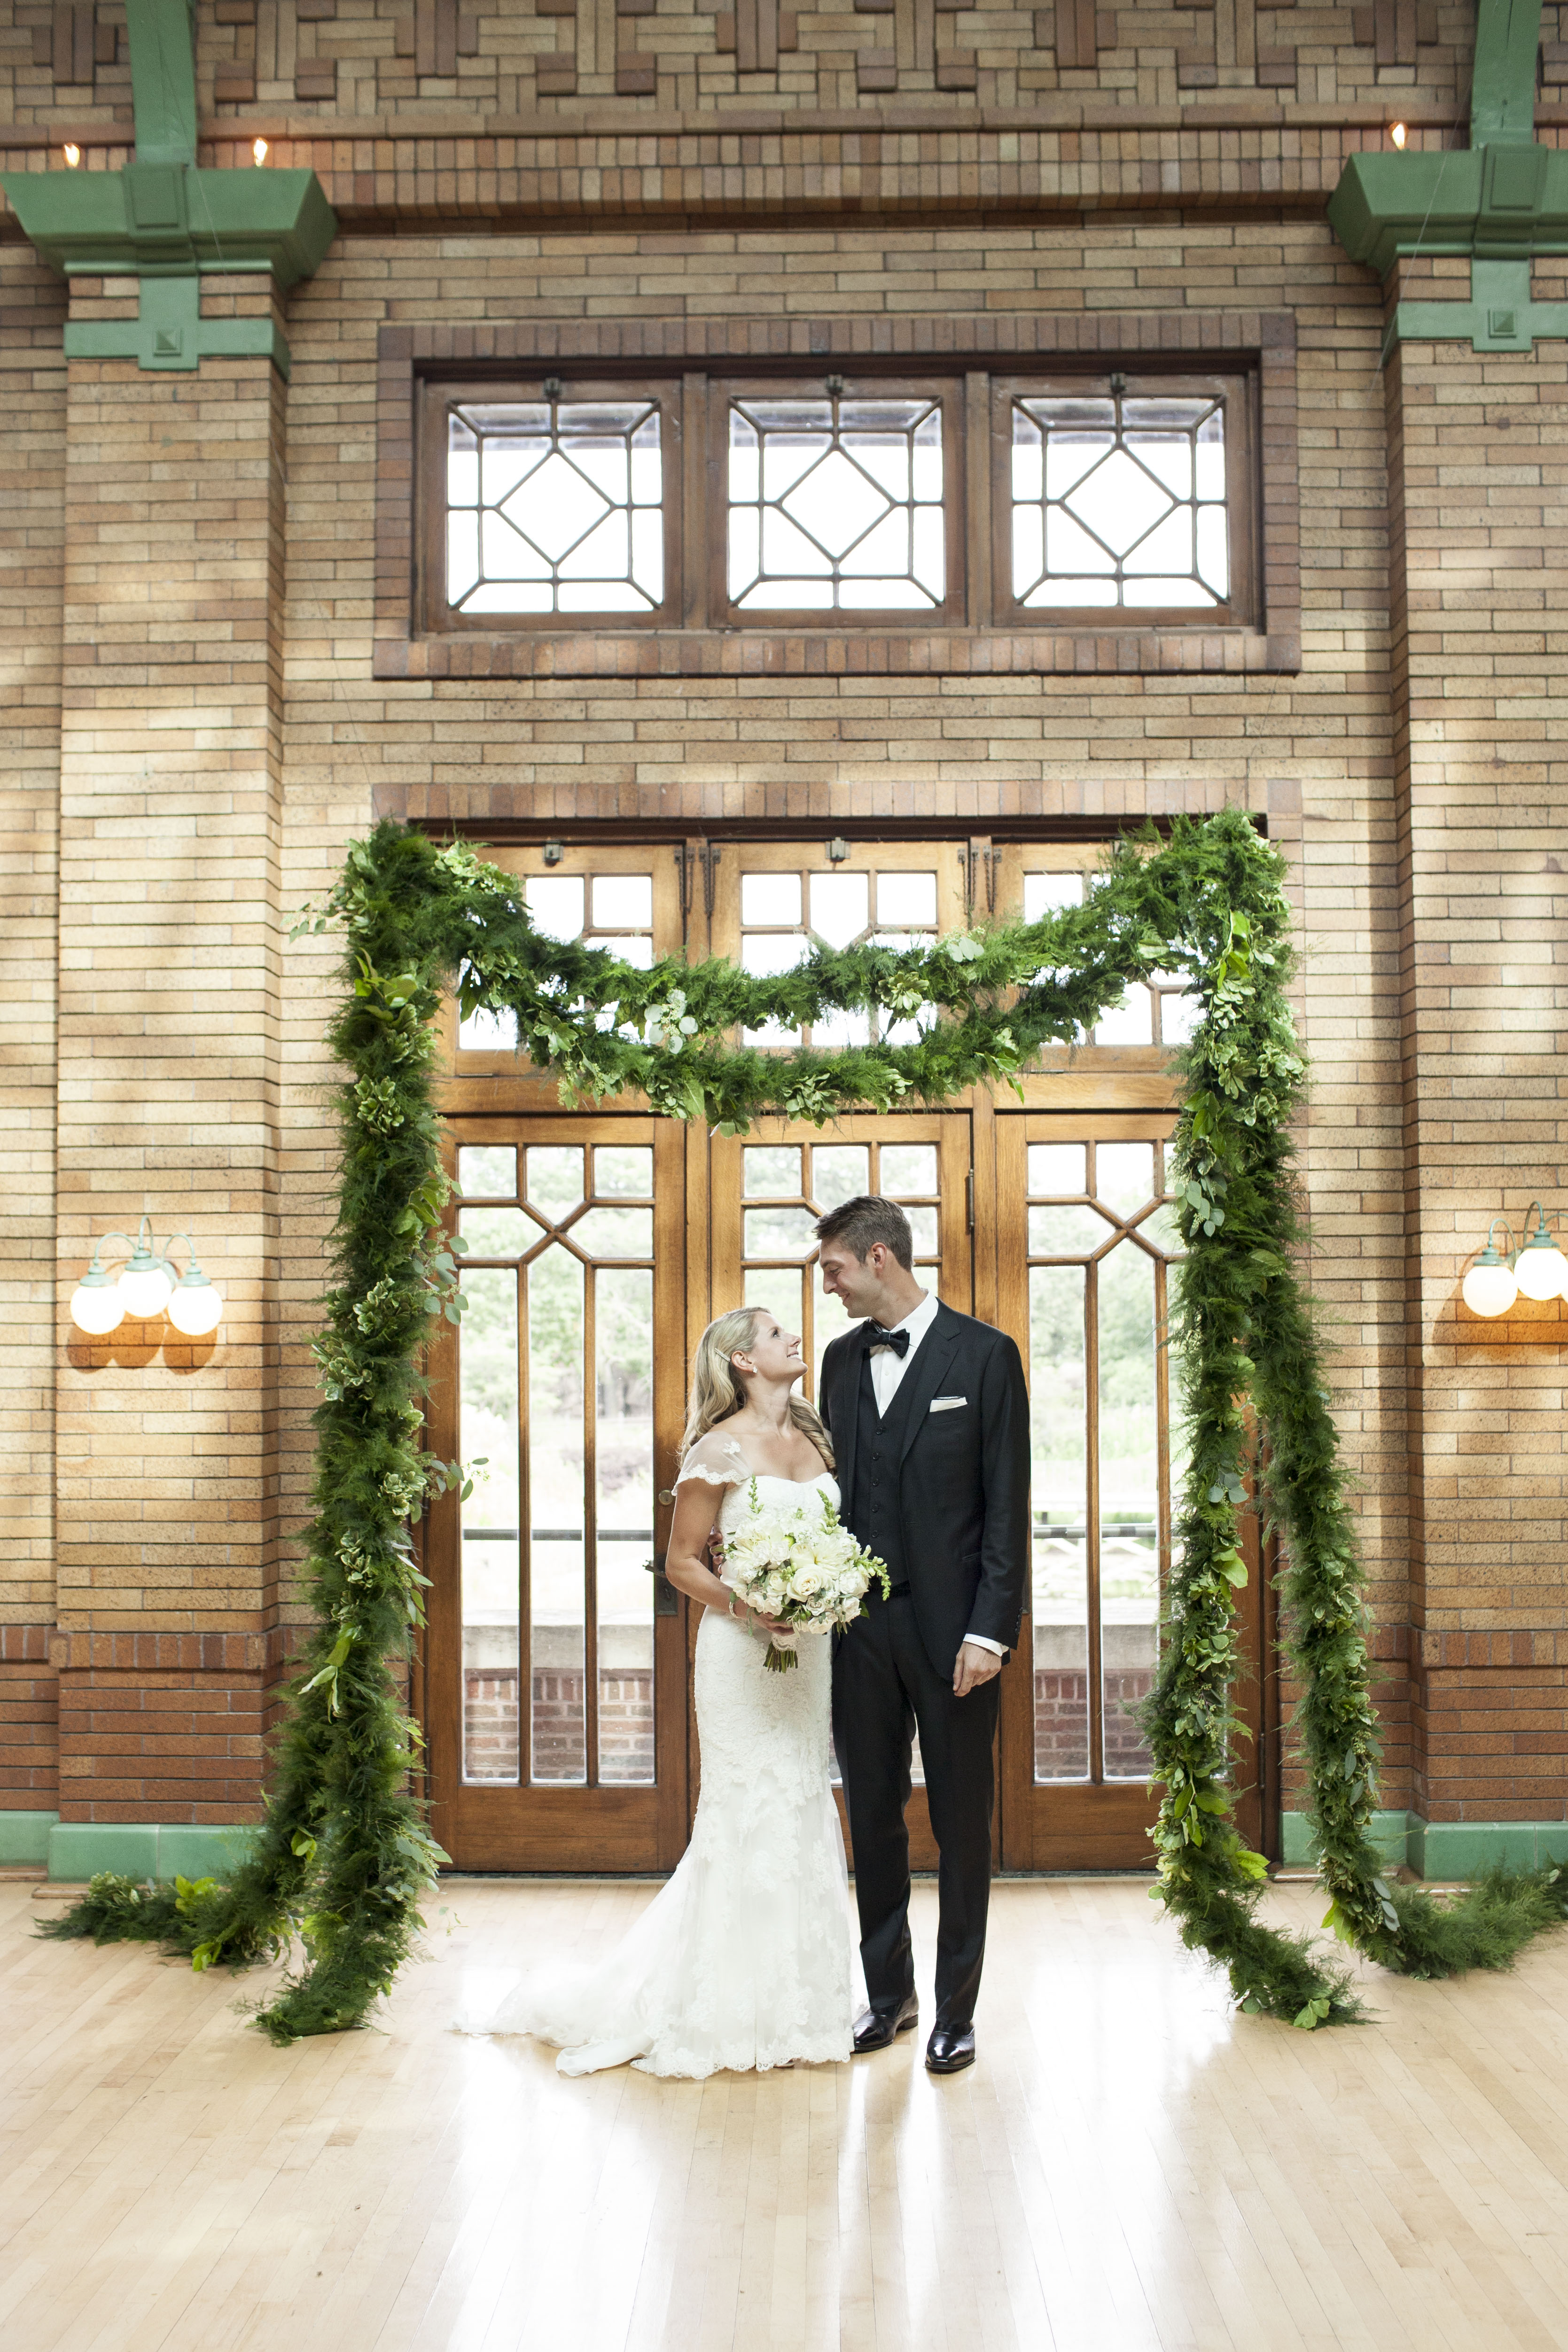 Sophisticated + Classic Chicago Wedding